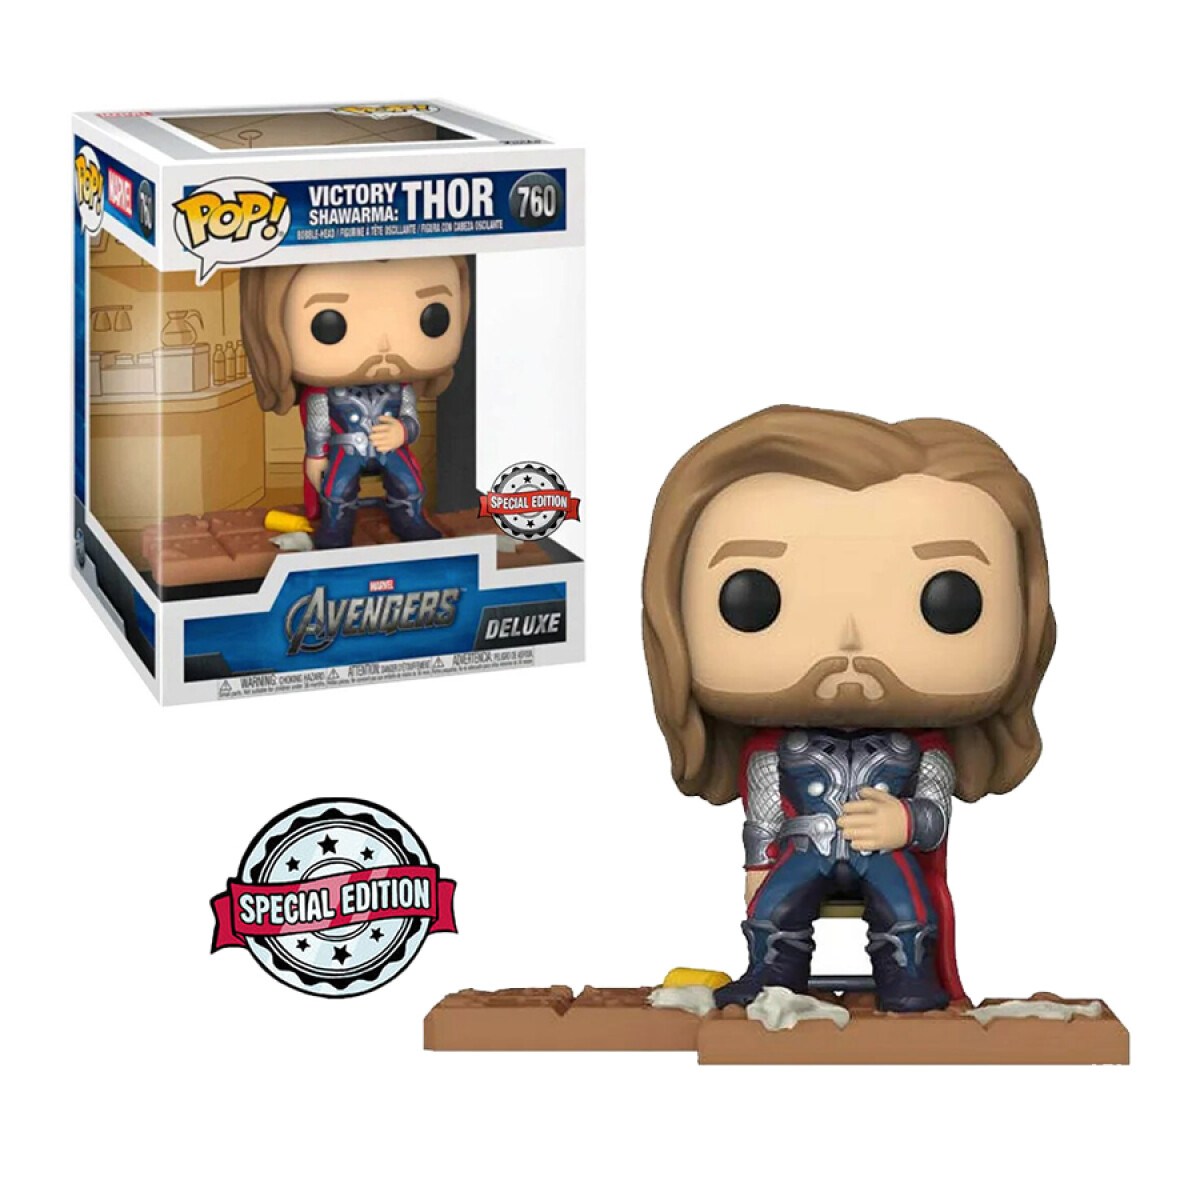 Victory Shawarma Thor · Avengers Deluxe [Exclusivo] - 760 